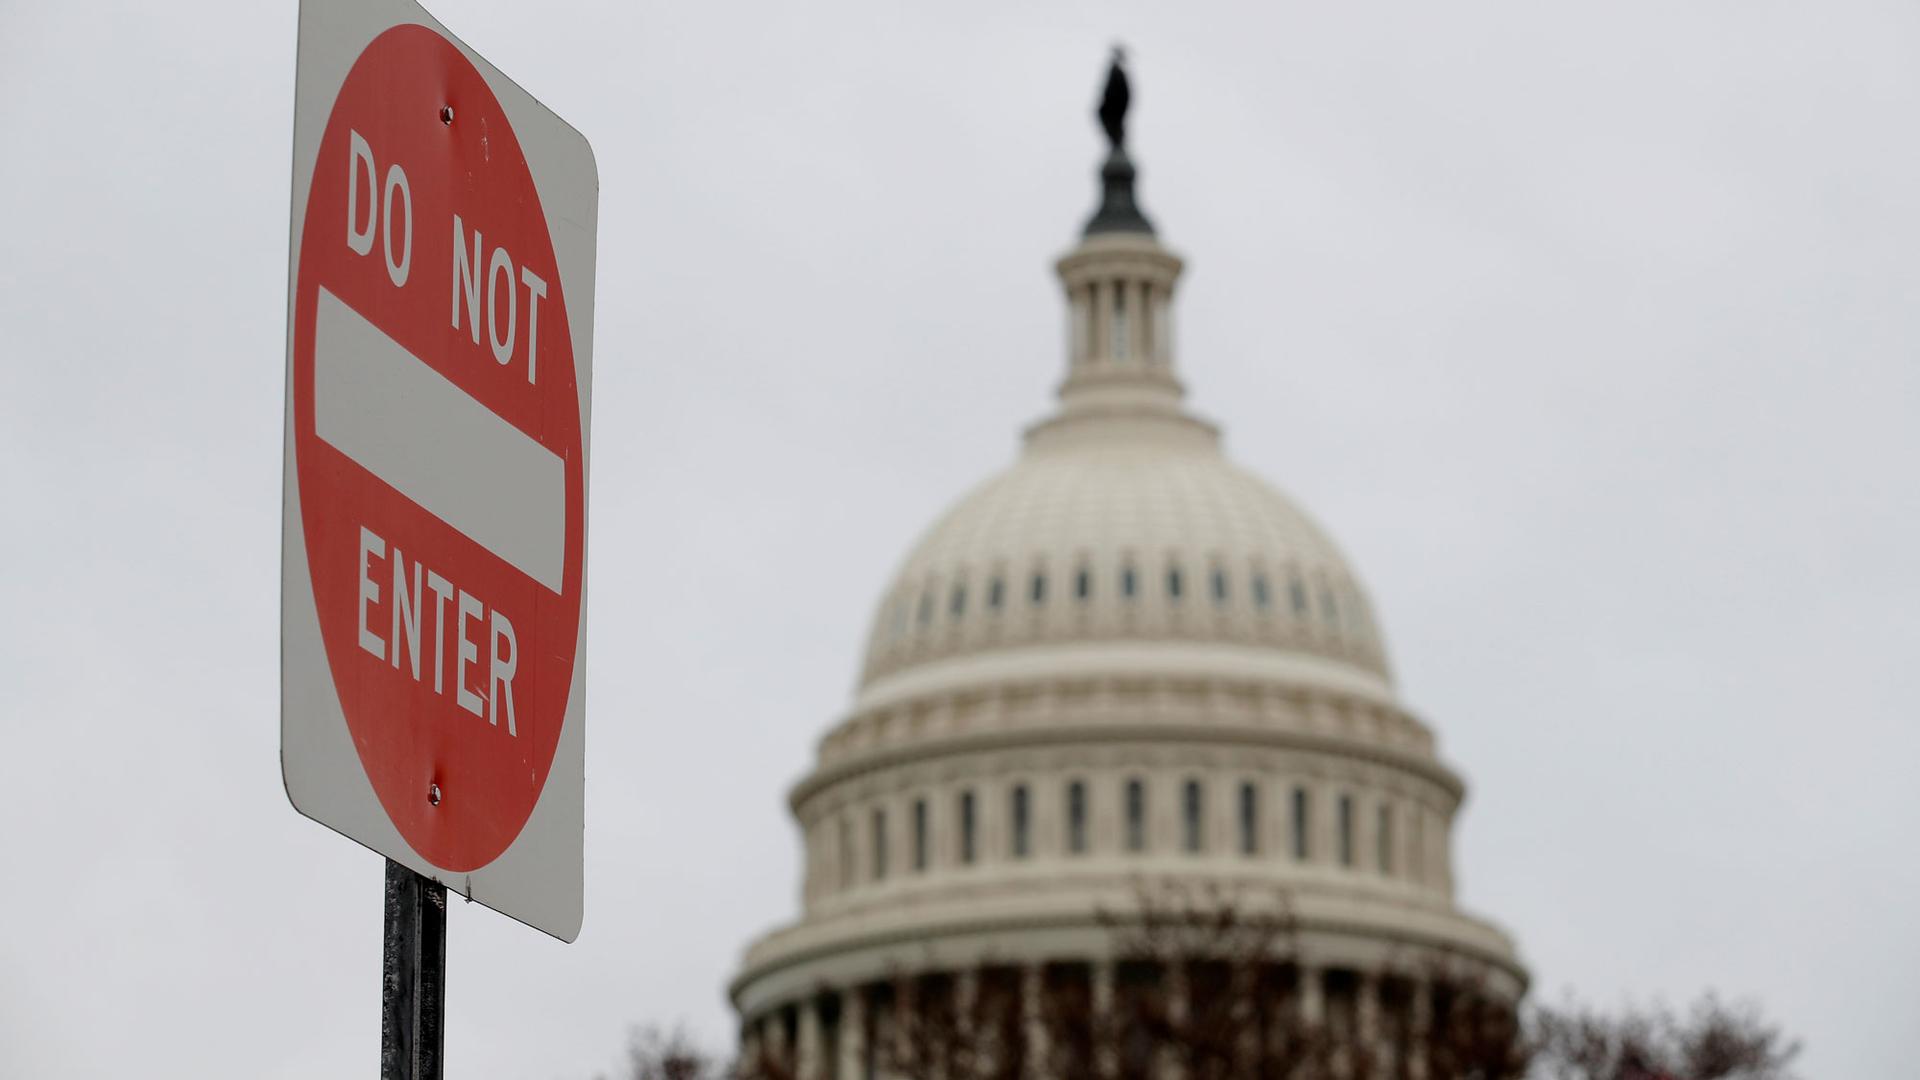 The top of the US Capitol building is show in the background with a 'Do not enter' sign shown in the nearground.